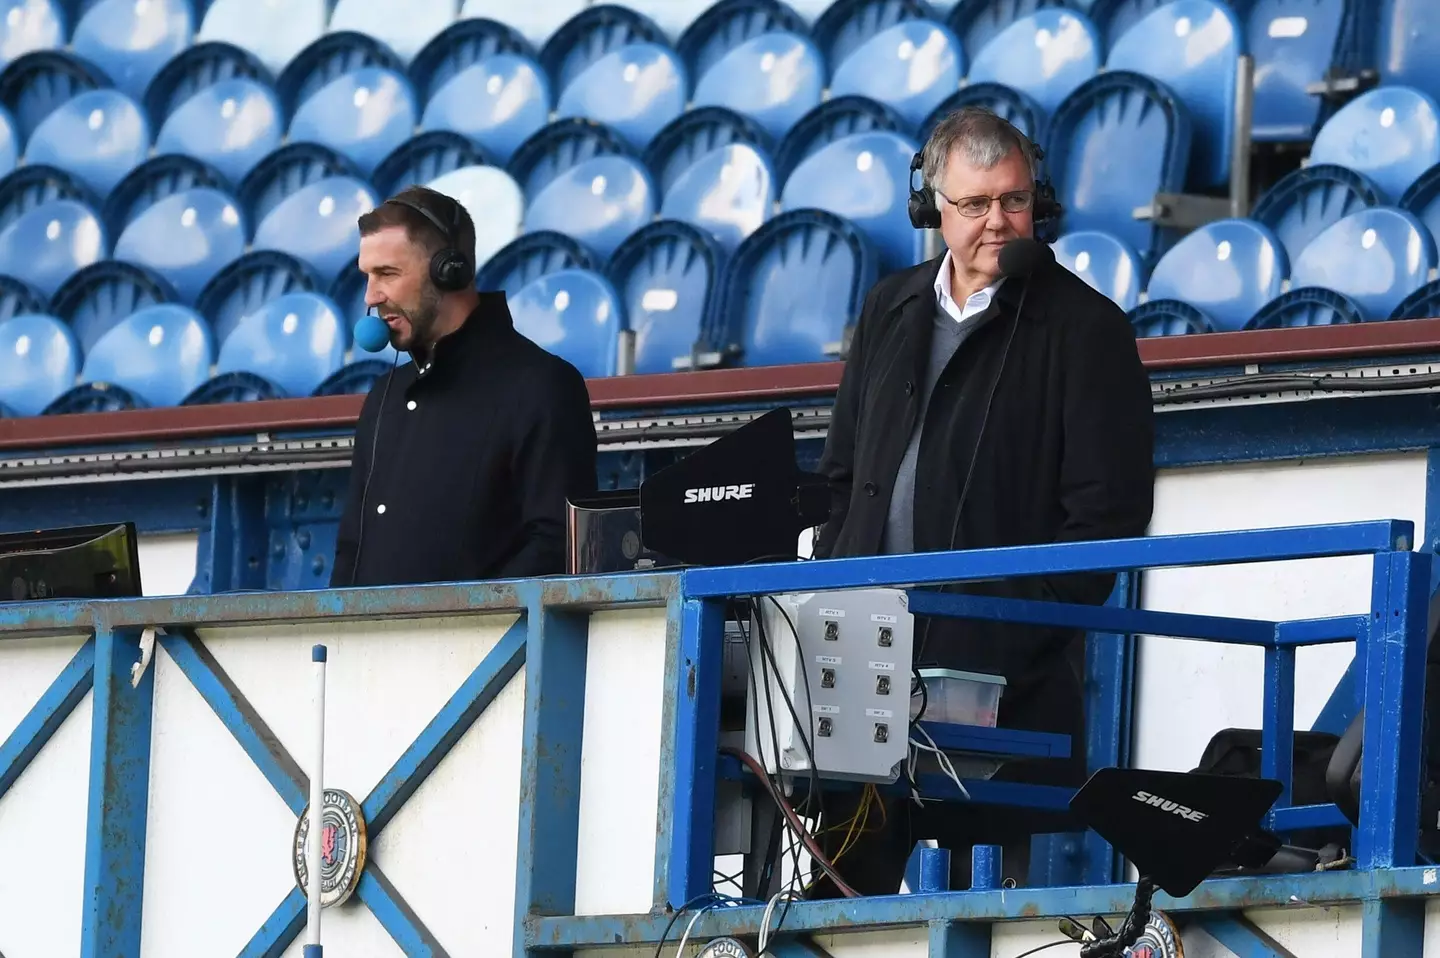 Tyldesley in his role as Rangers TV commentator. (Image